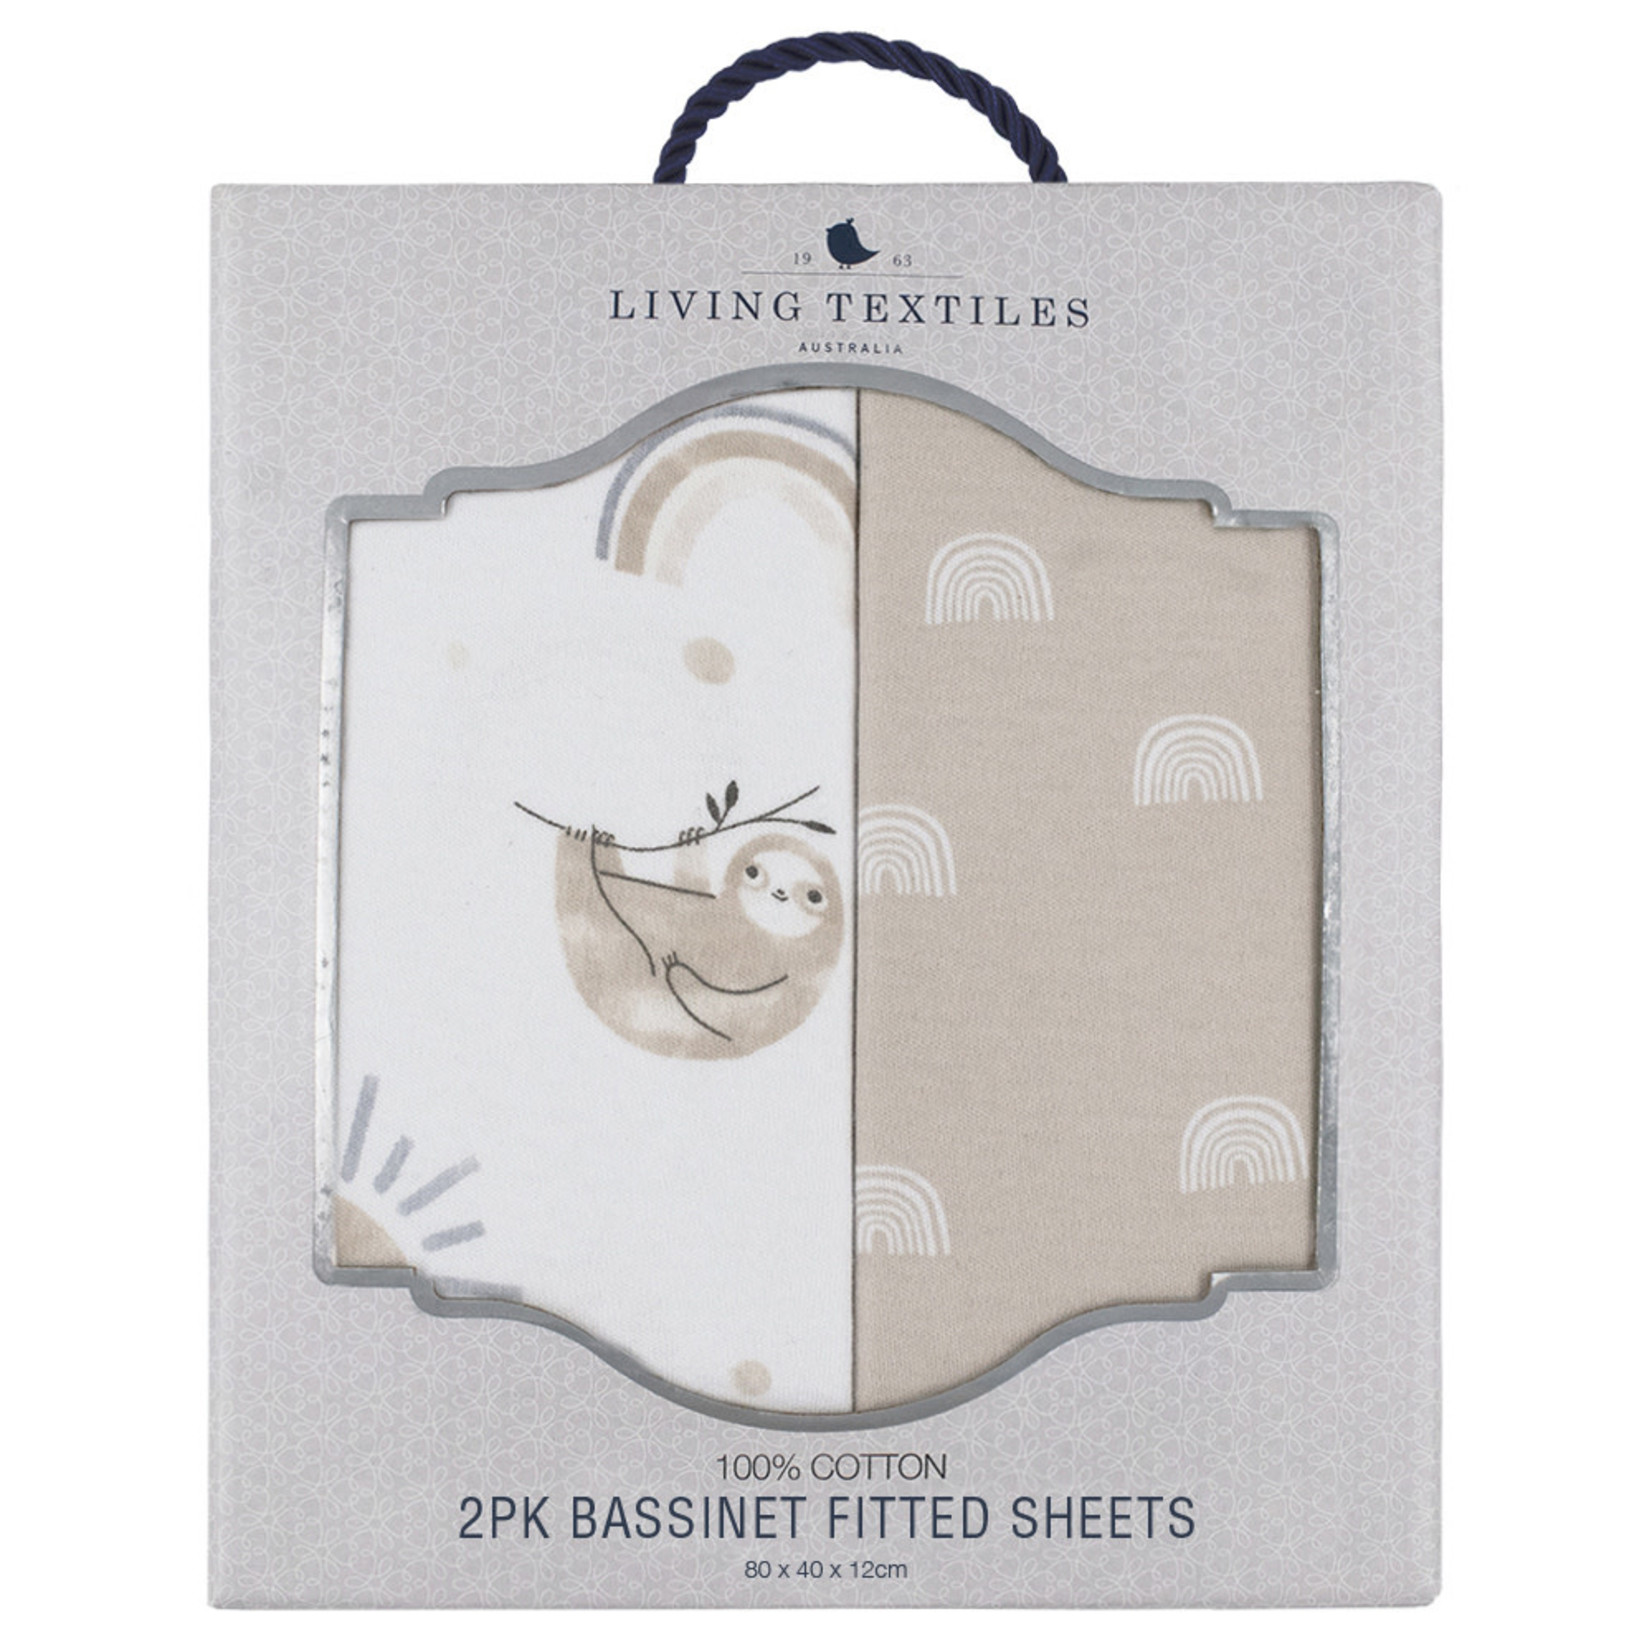 Living Textiles 2pk Bassinet Fitted Sheets-Sloth/Rainbow